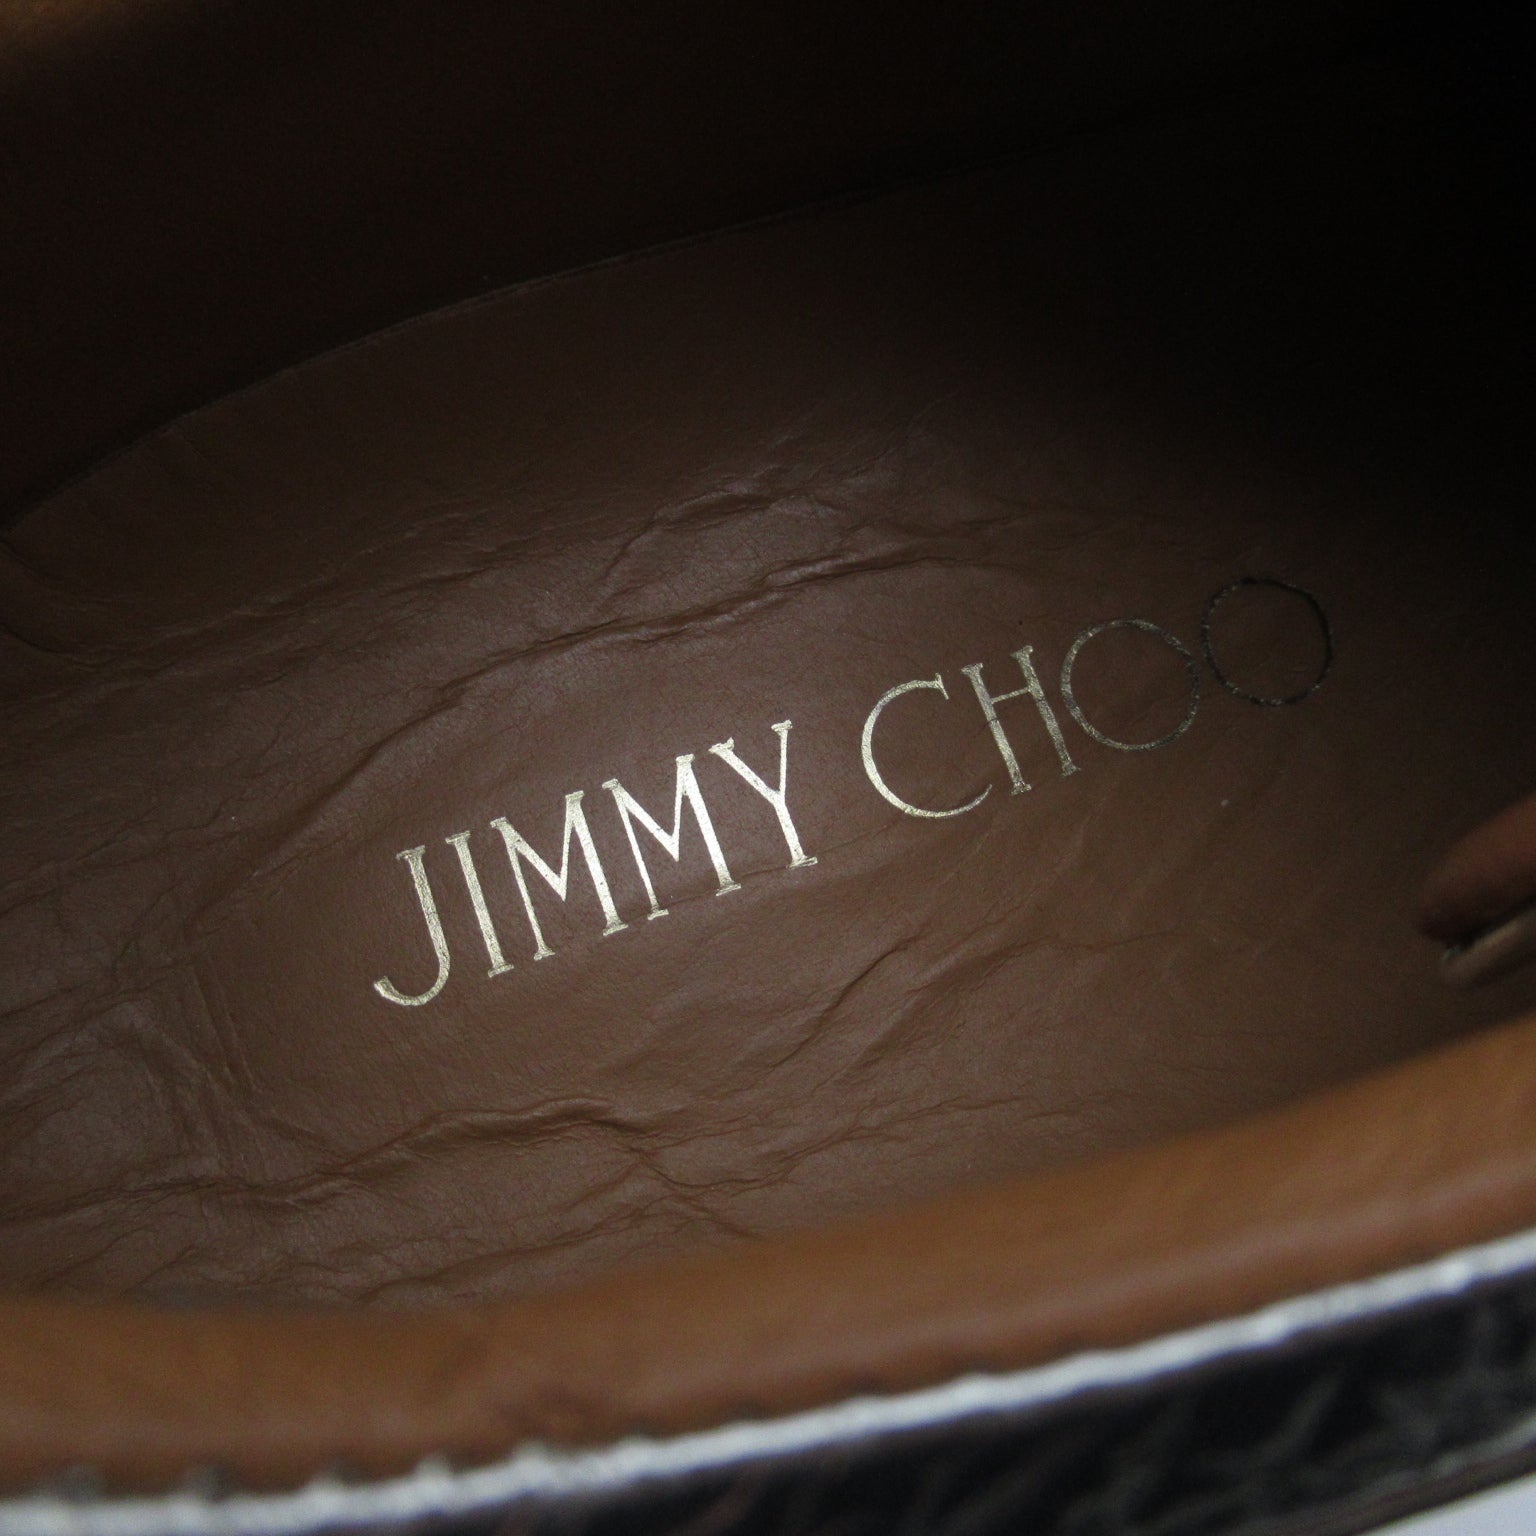 JIMMY CHOO Trainers Shoes Sniper Shoes Sniper Shoes, Sniper Shoes, Sniper Shoes, Sniper Shoes, Sniper Shoes